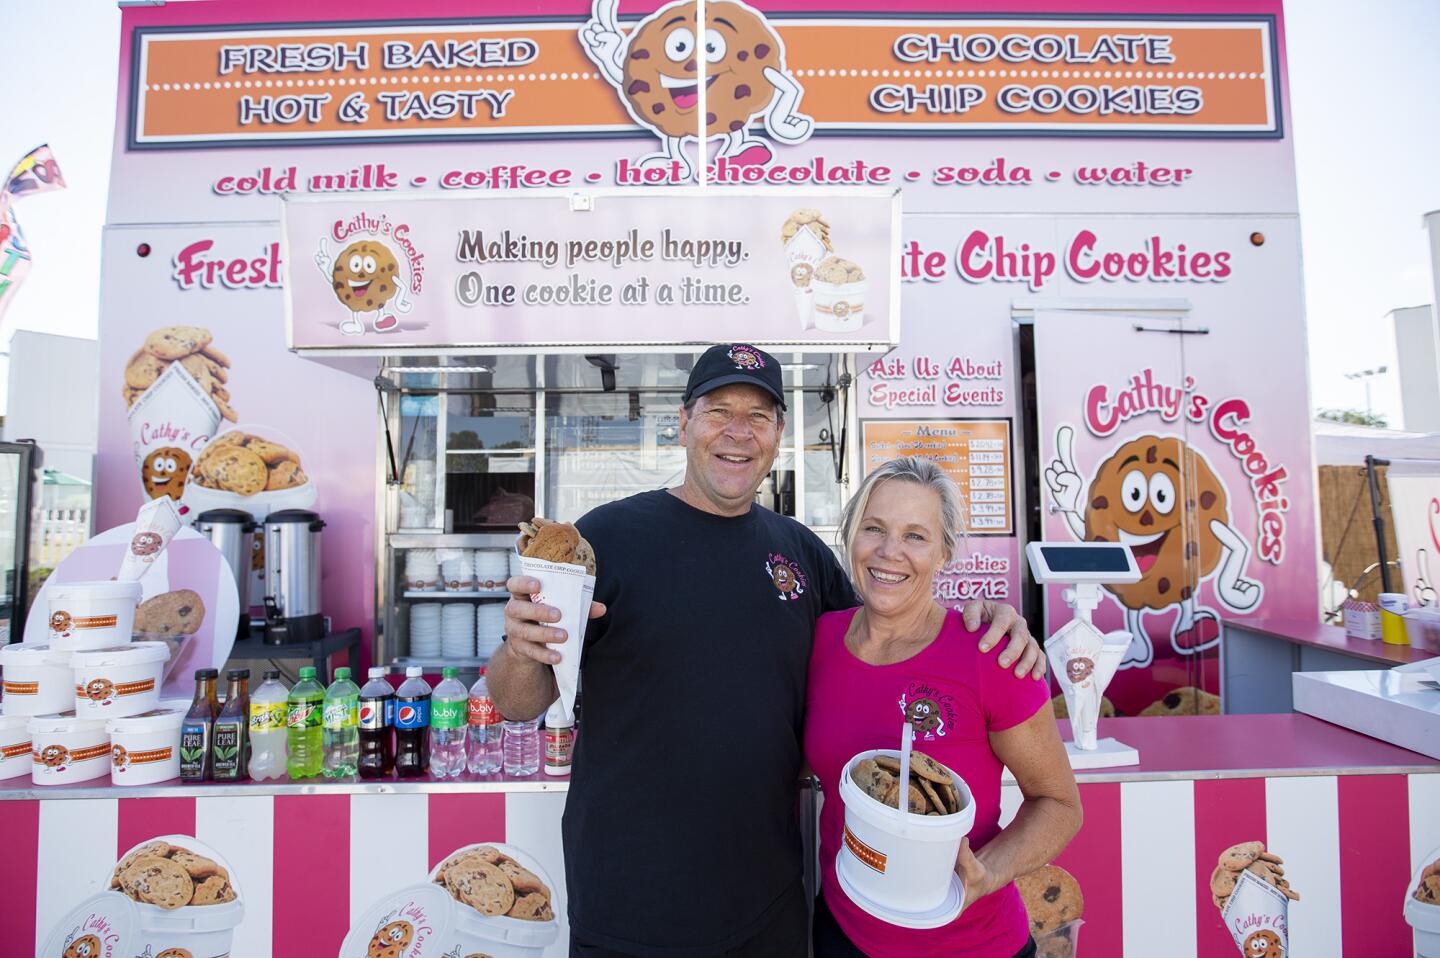 Partners Ross Alger and Cathy Johnson run the Cathy's Cookies stand, which joined the Orange County Fair last year.